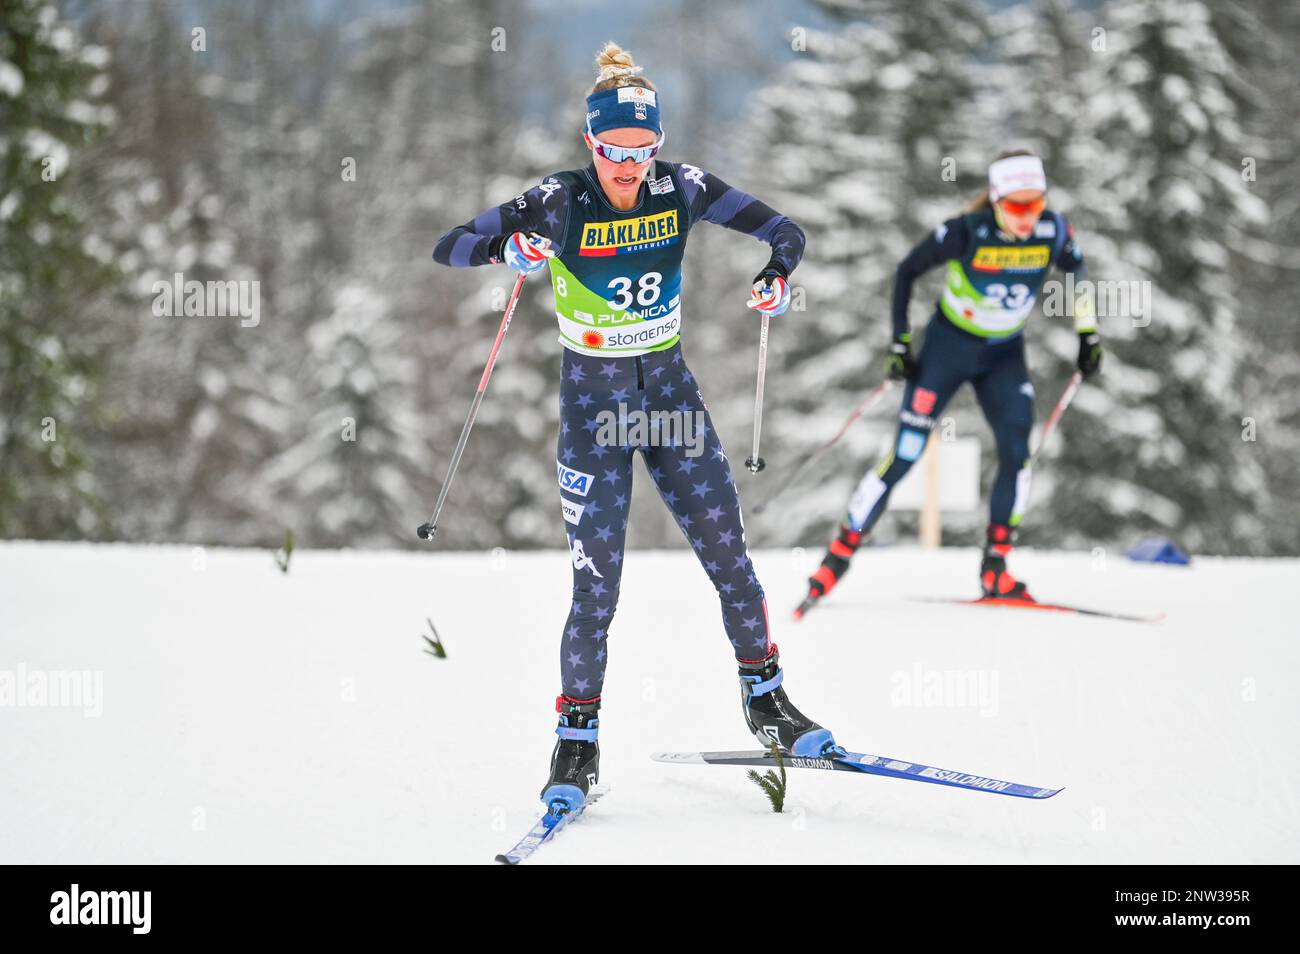 Planica, Slovenia. 28th Feb, 2023. American Jessie Diggins en route to winning the women’s 10-K freestyle race at the 2023 FIS World Nordic Ski Championships in Planica, Slovenia. John Lazenby/Alamy Live news Stock Photo